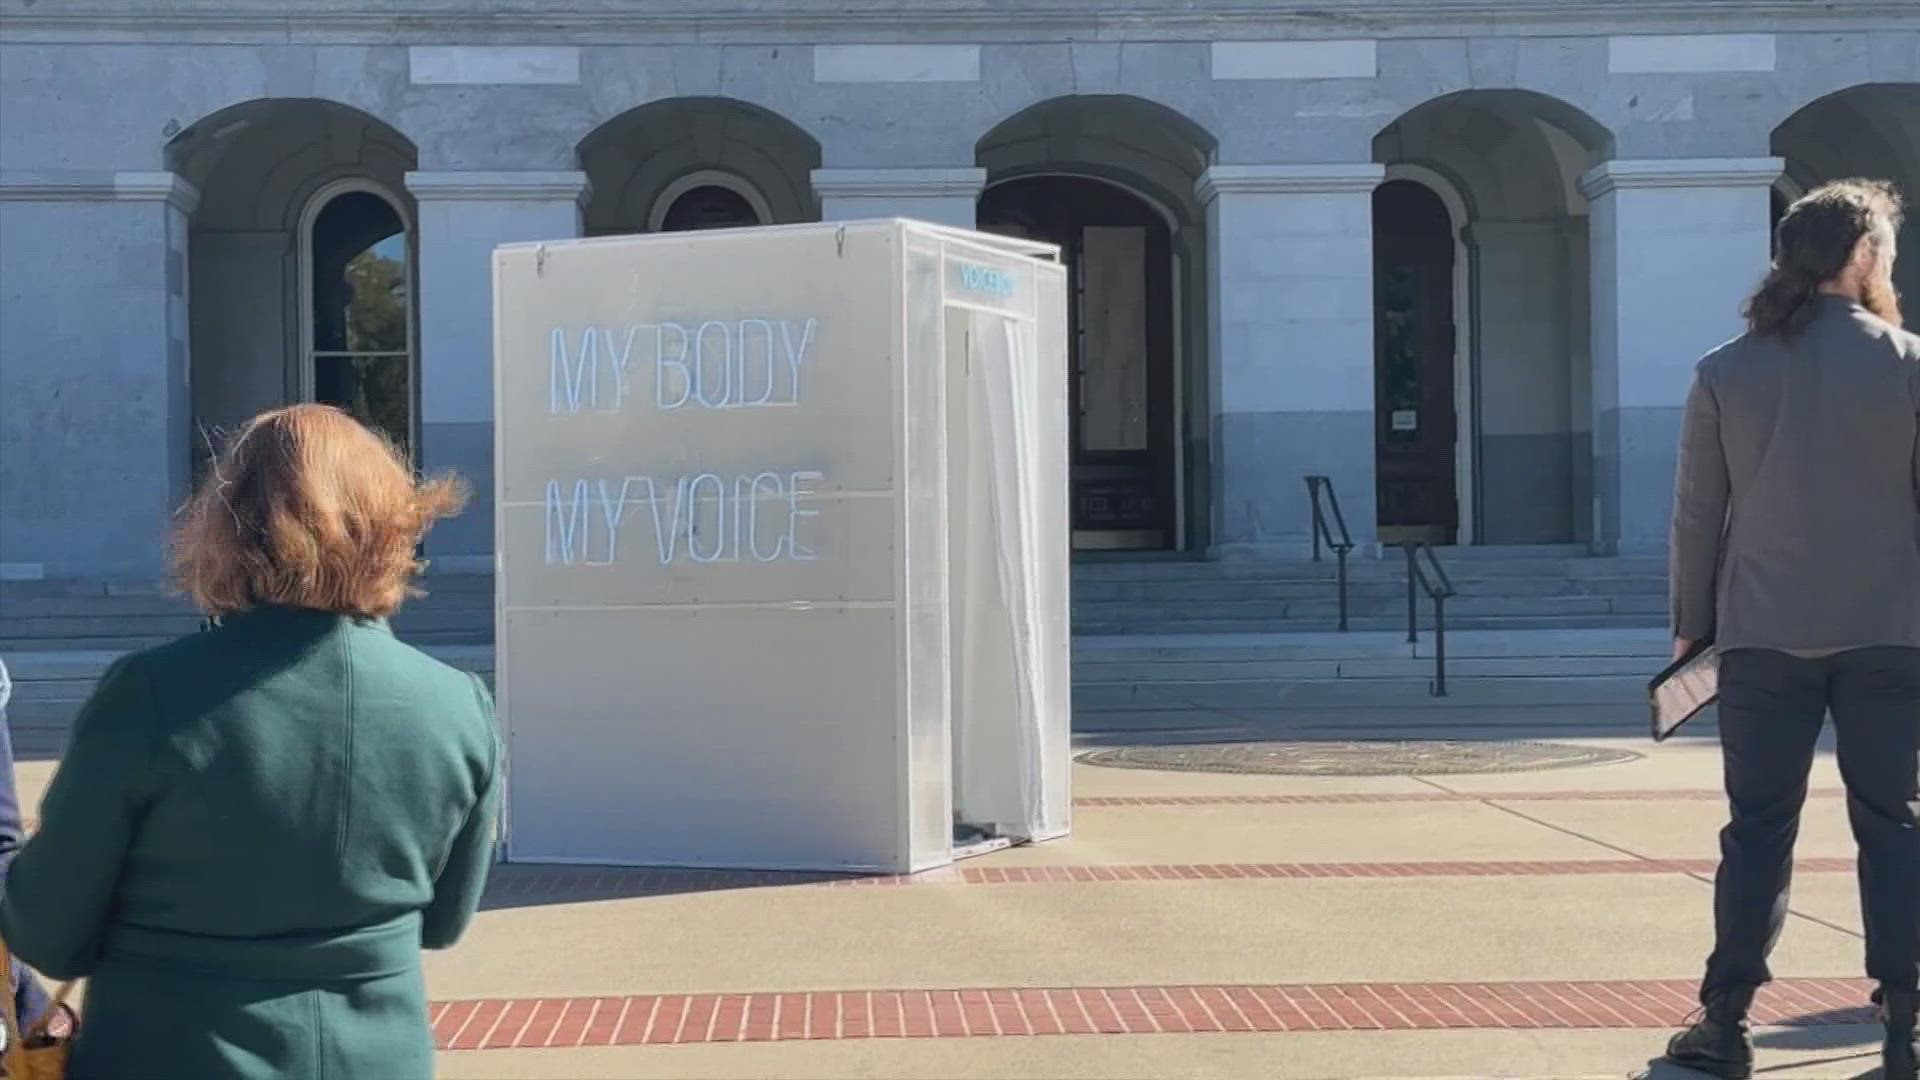 A pop-up studio booth came to Sacramento to gather reproductive health stories for a documentary.